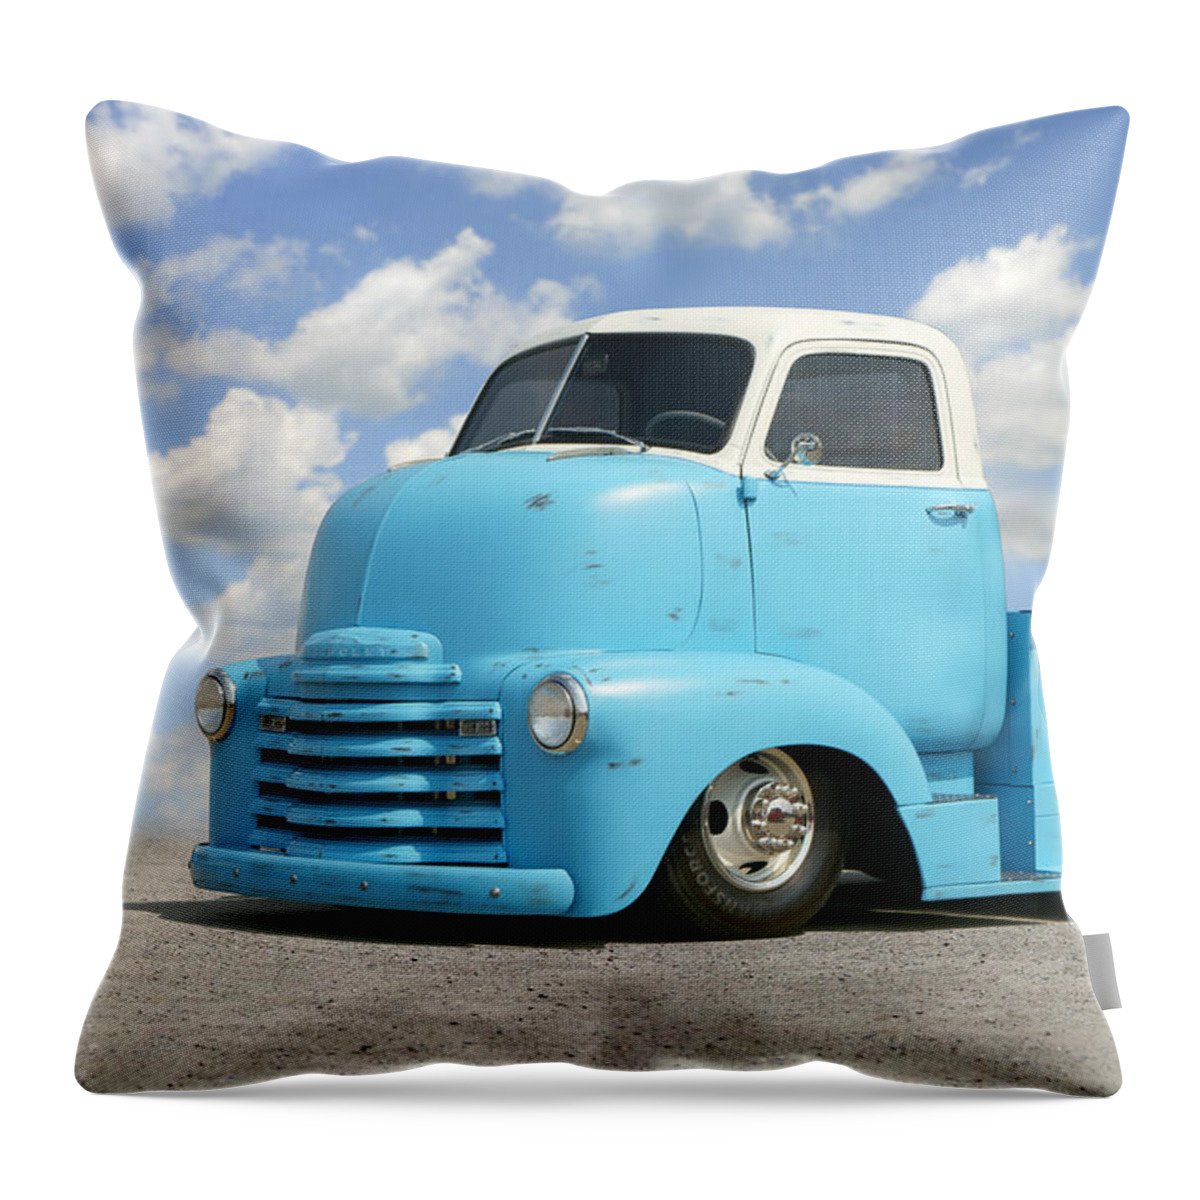 Chevy Truck Throw Pillow featuring the photograph Heavy Duty Chevy Truck by Mike McGlothlen